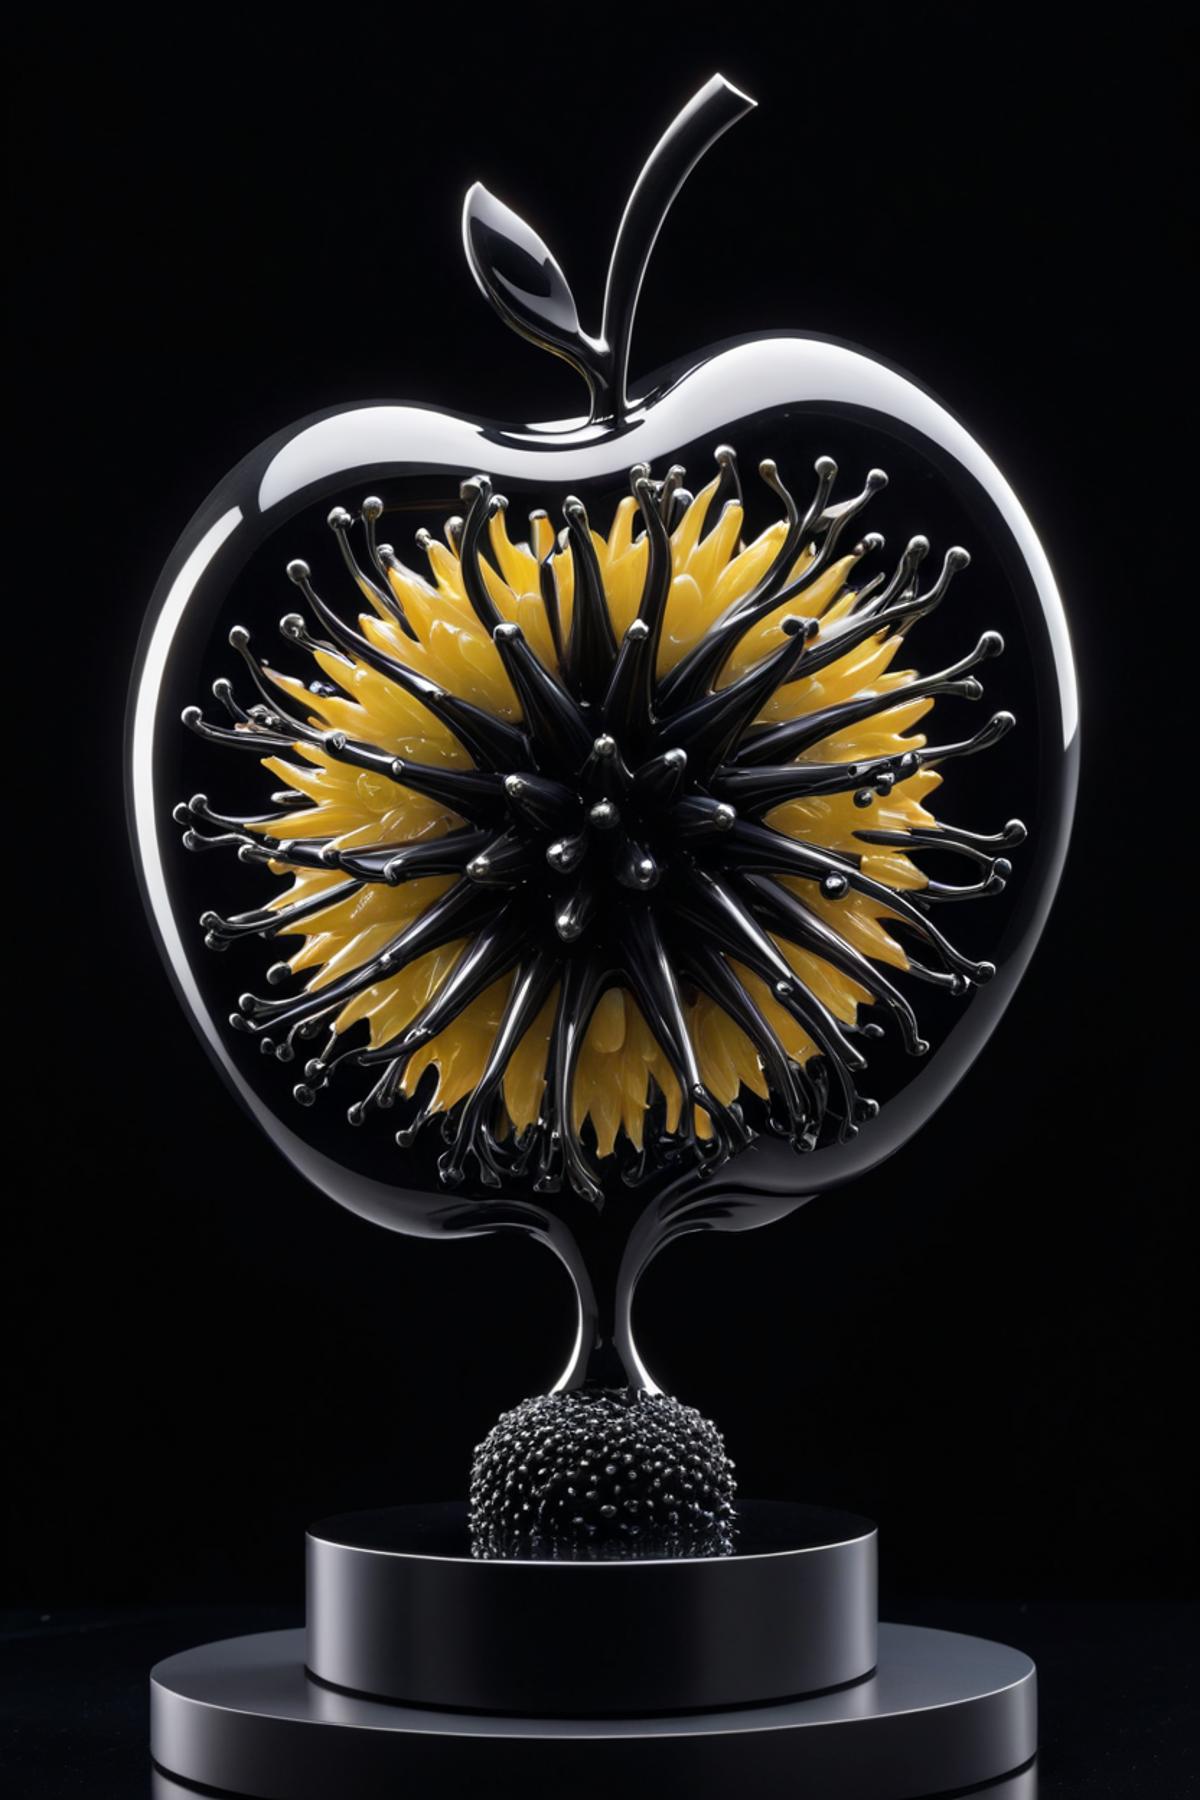 A glass apple sculpture with a yellow flower on top.